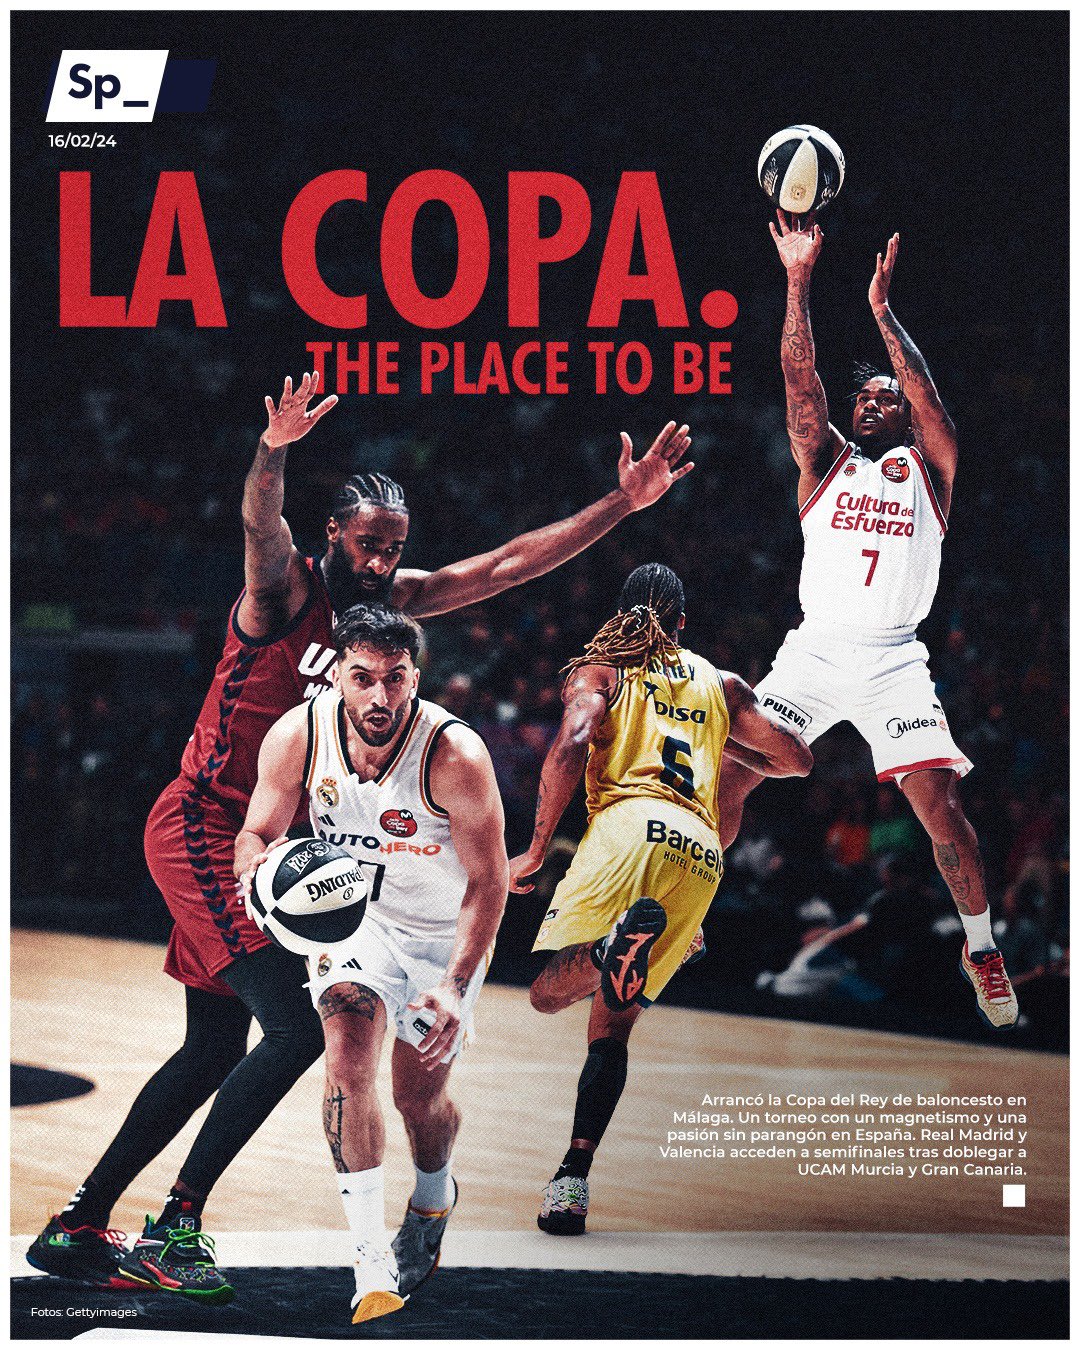 La Copa. The place to be.